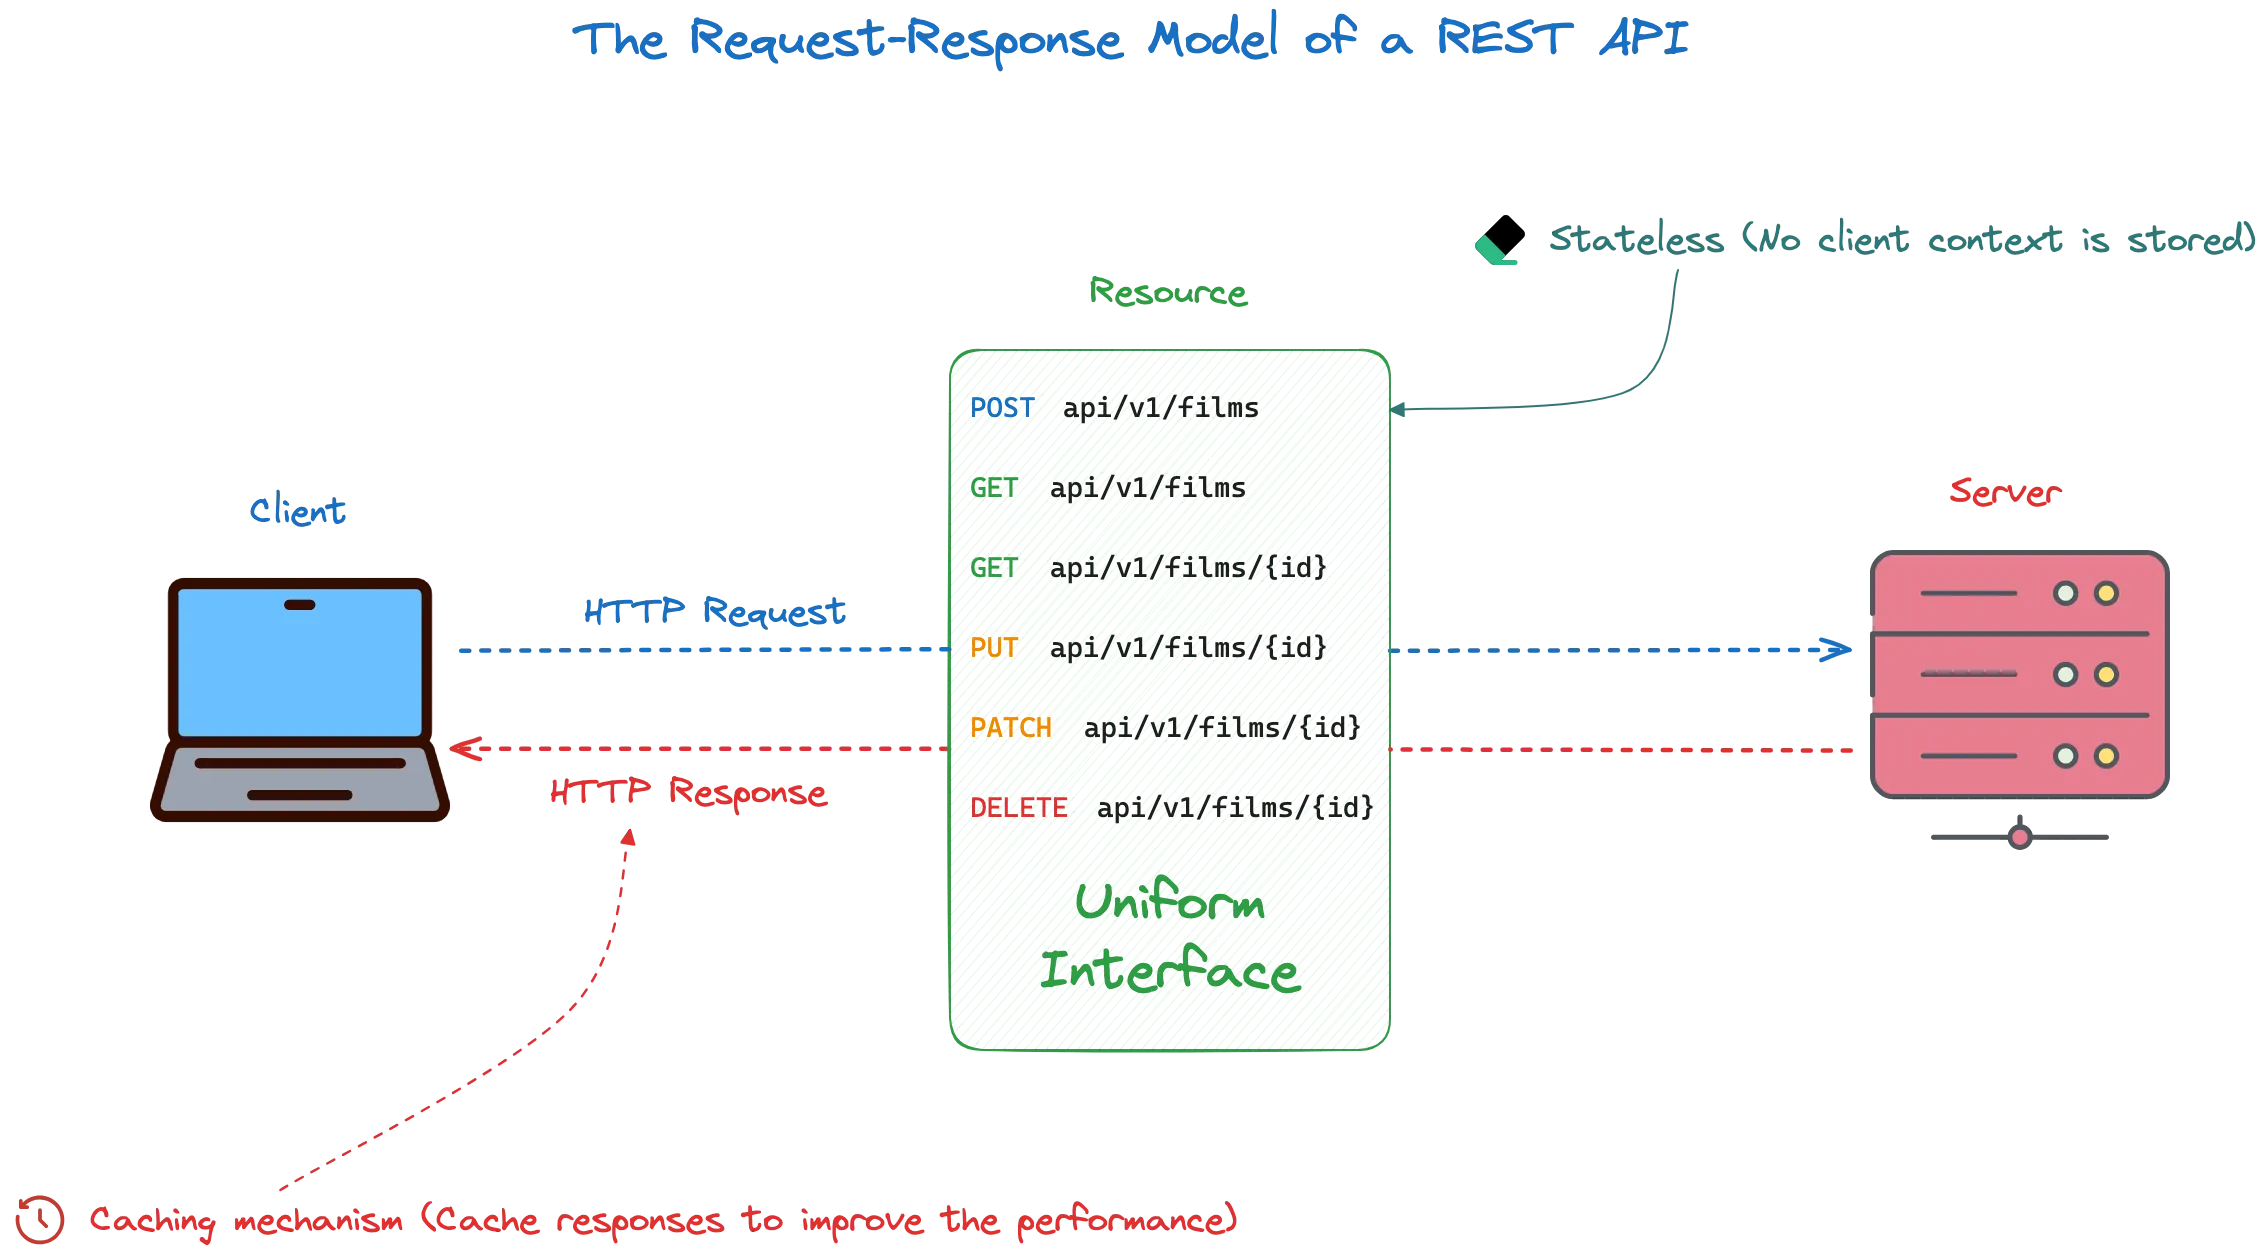 The Request-Response model of a REST API